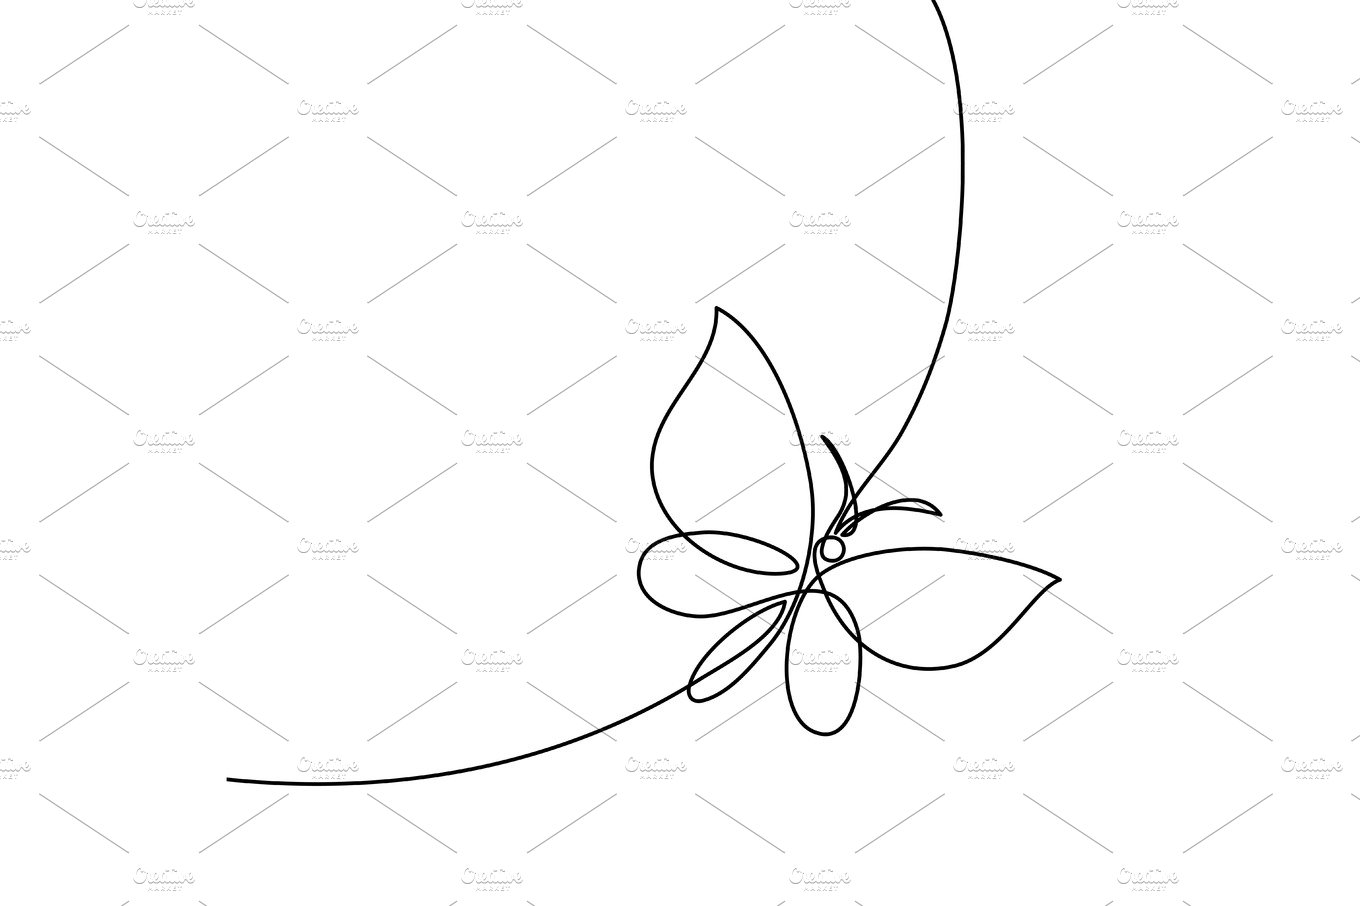 Continuous line butterfly cover image.